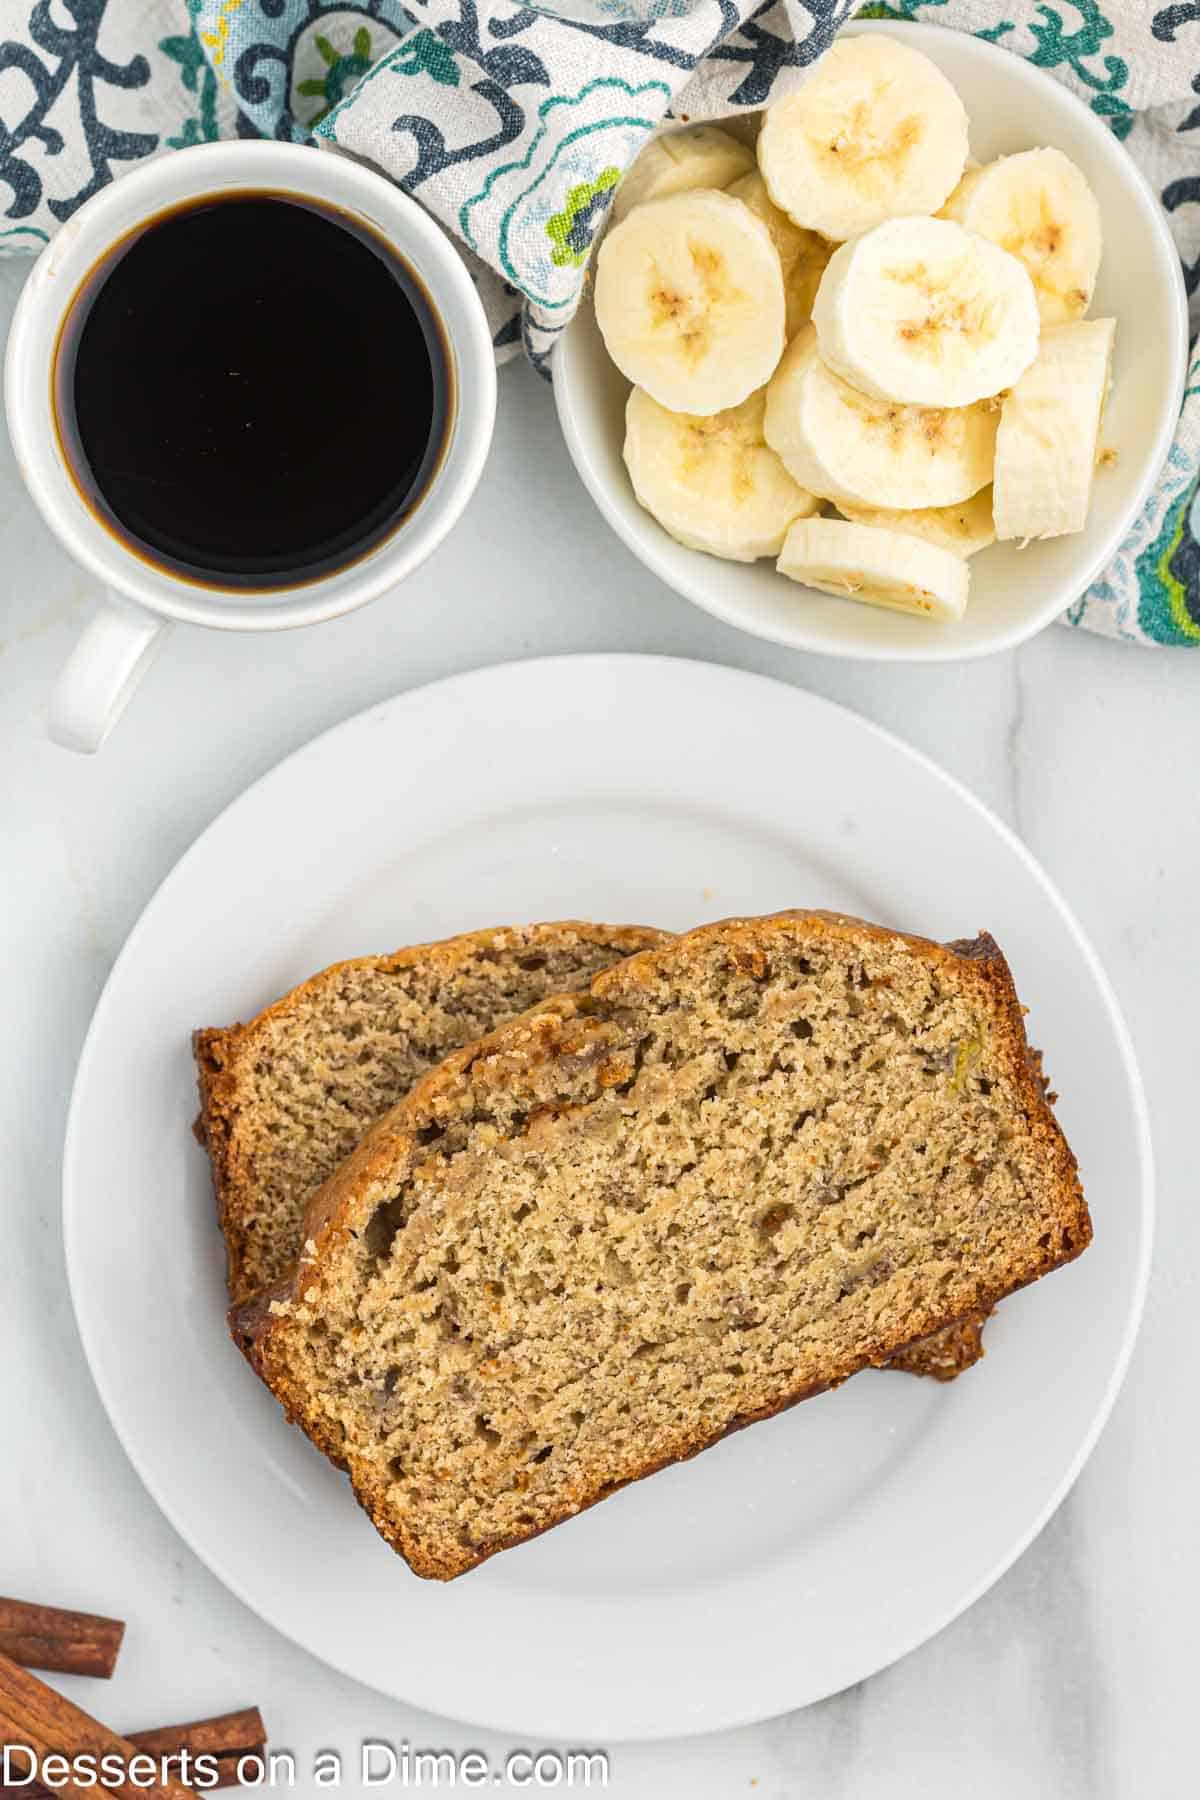 Slice brown sugar banana bread on a plate with a bowl of slice bananas and coffee